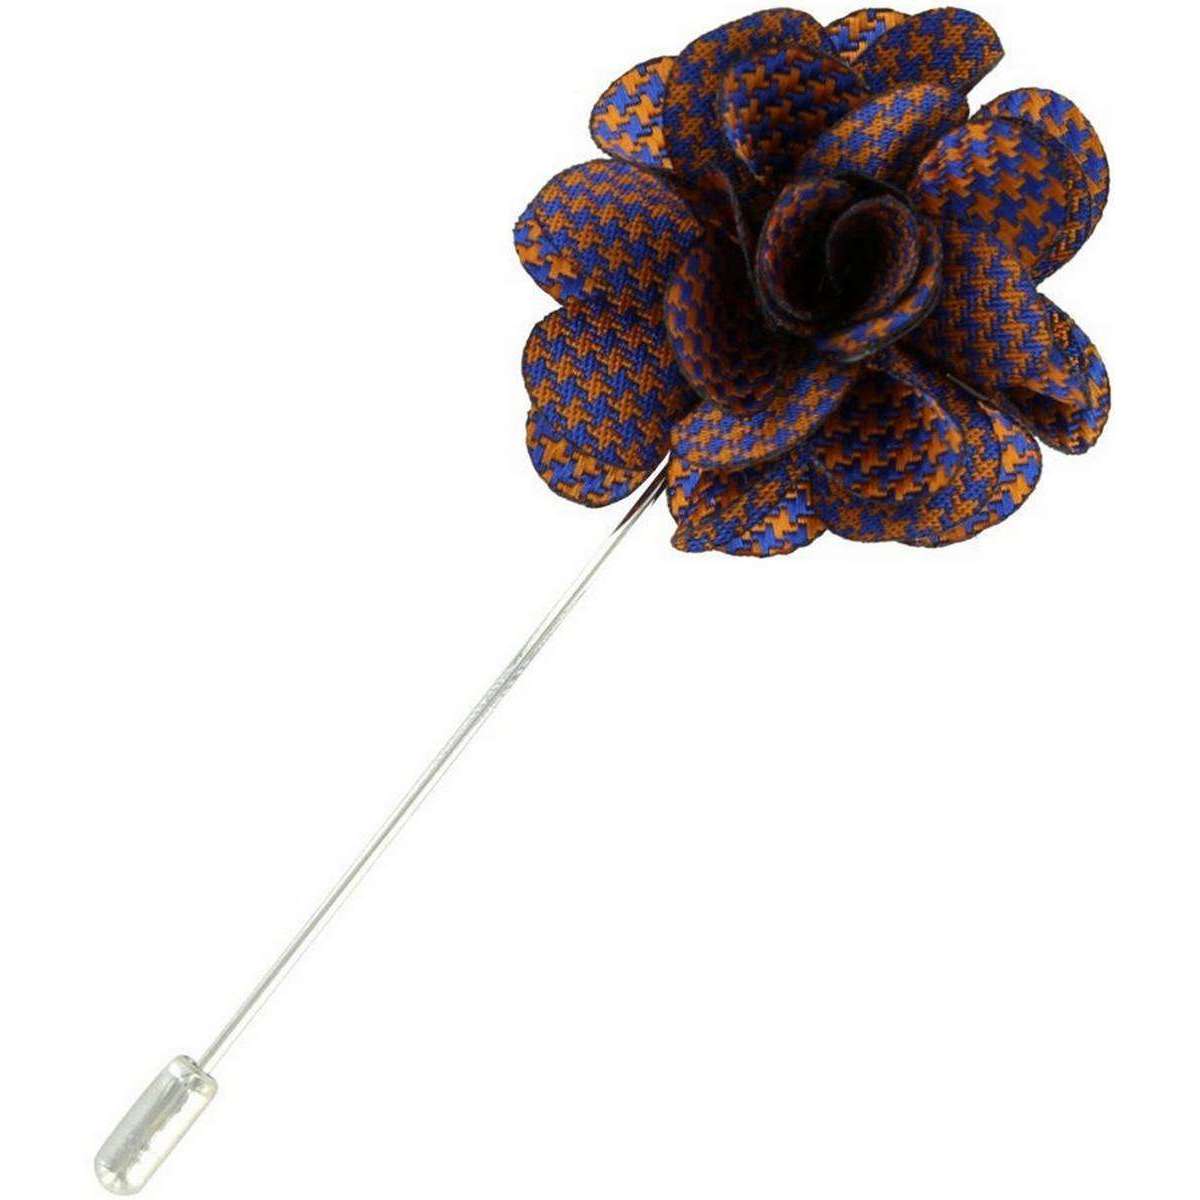 Michelsons of London Puppy Tooth Flower Lapel Pin - Royal Blue/Orange